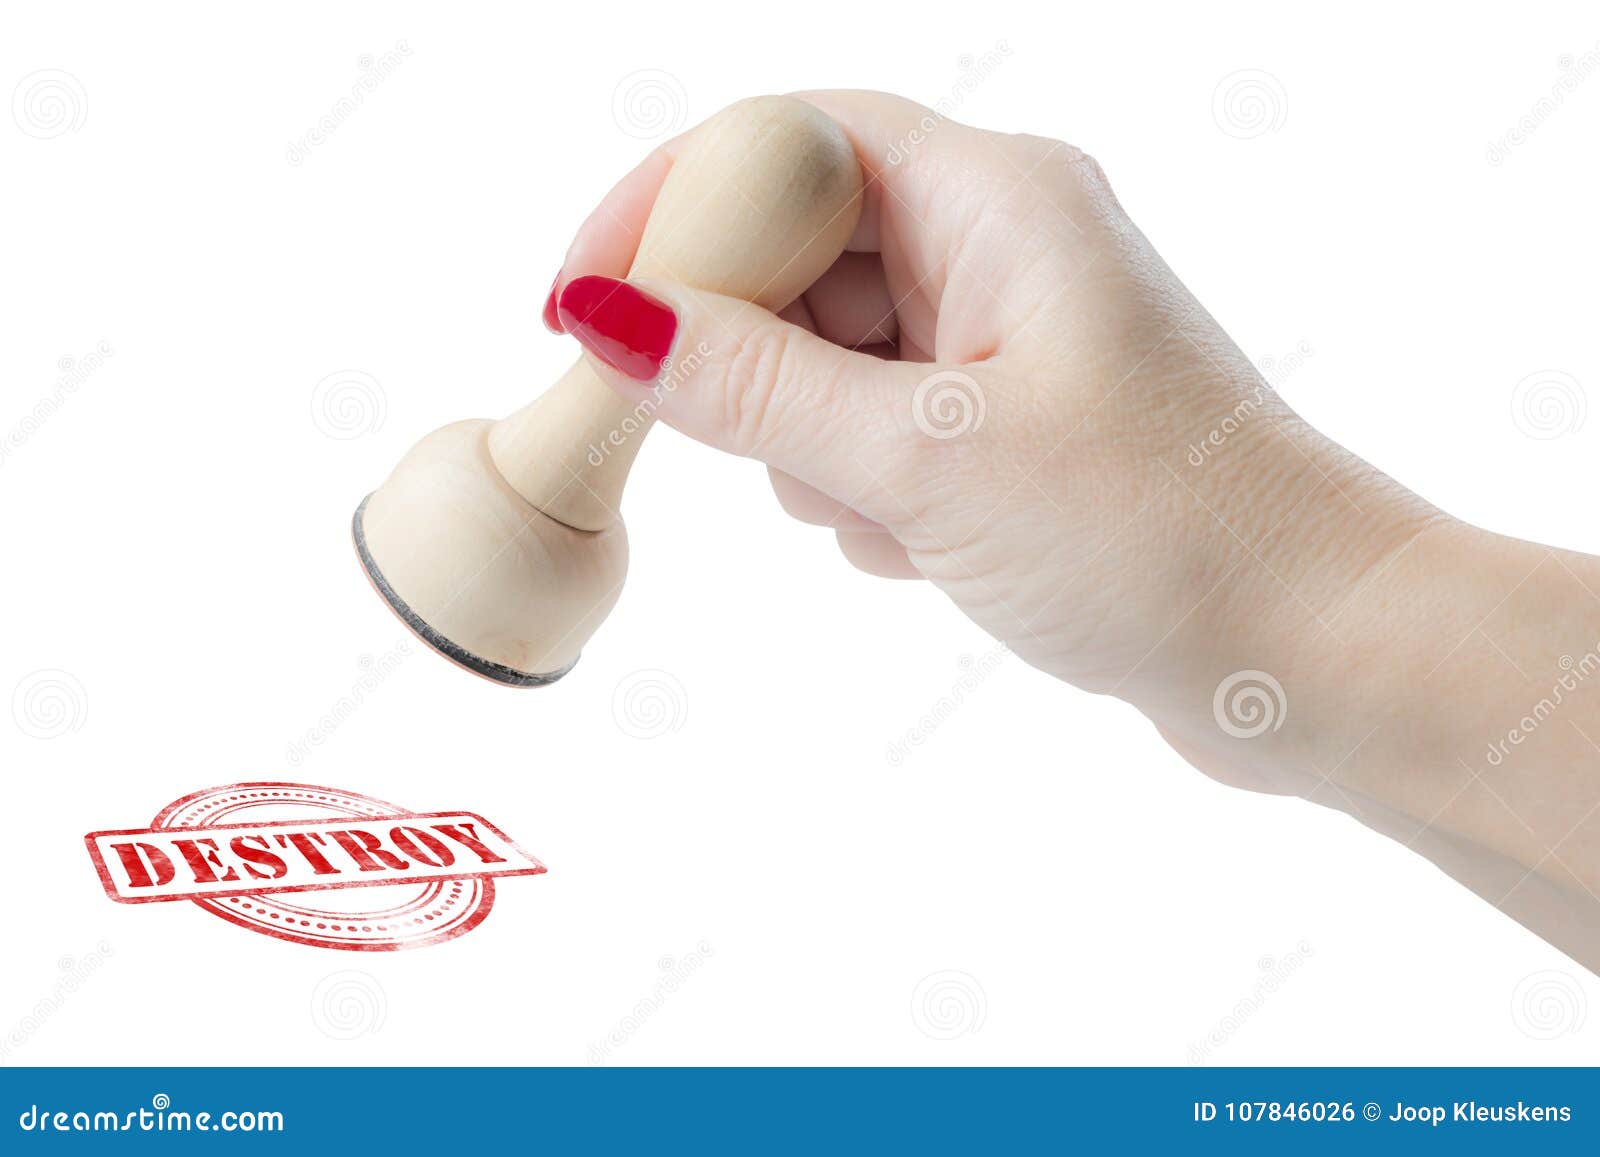 hand holding a rubber stamp with the word destroy